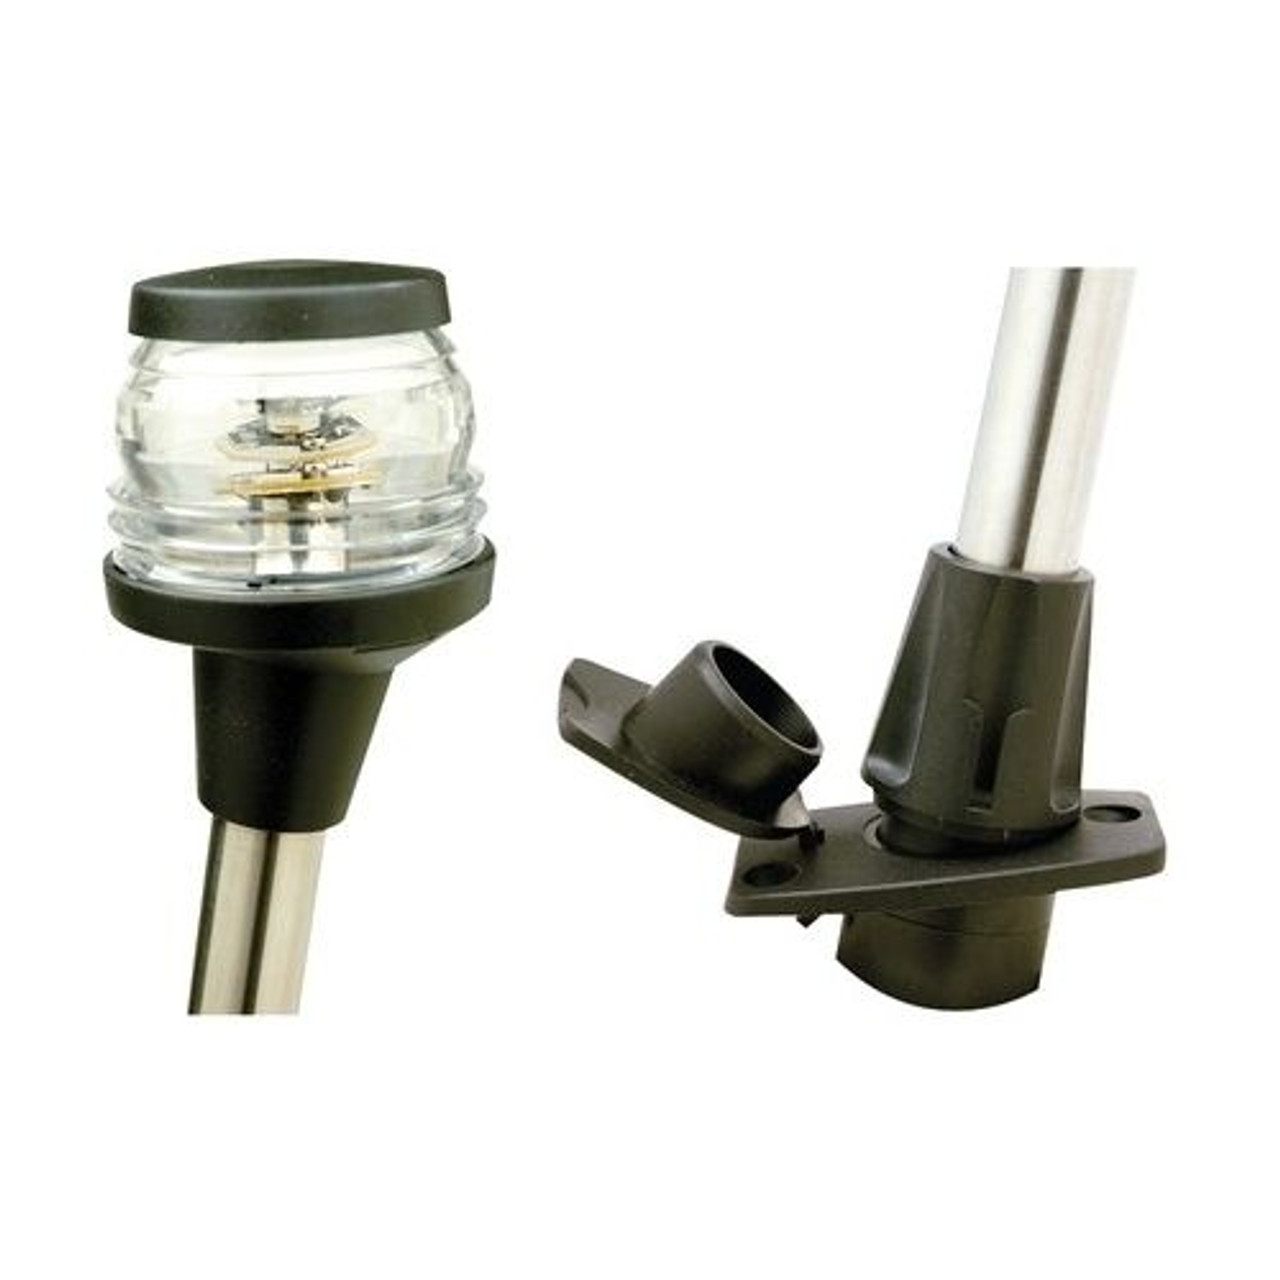 24 Inch LED Stow-A-Way All Around White Navigation Light and Base for Boats